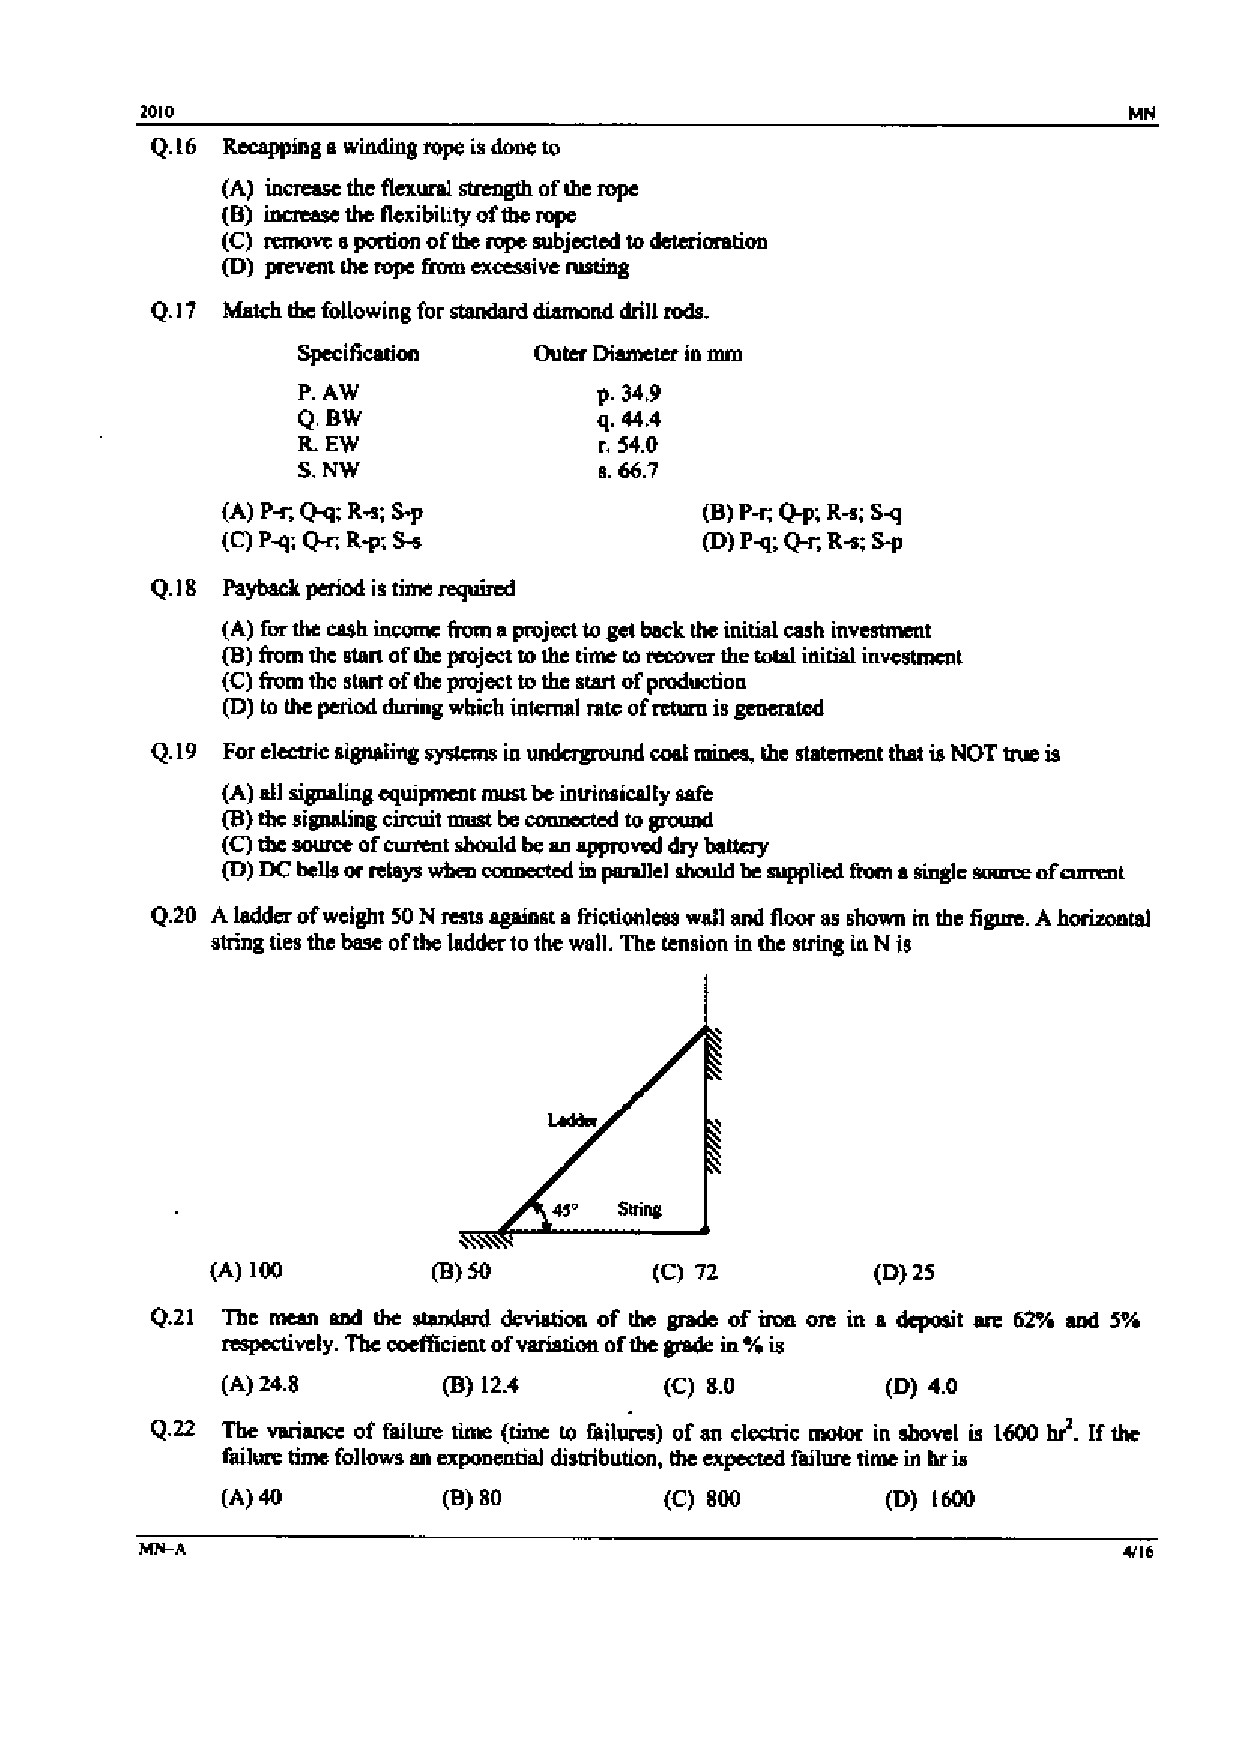 GATE Exam Question Paper 2010 Mining Engineering 4